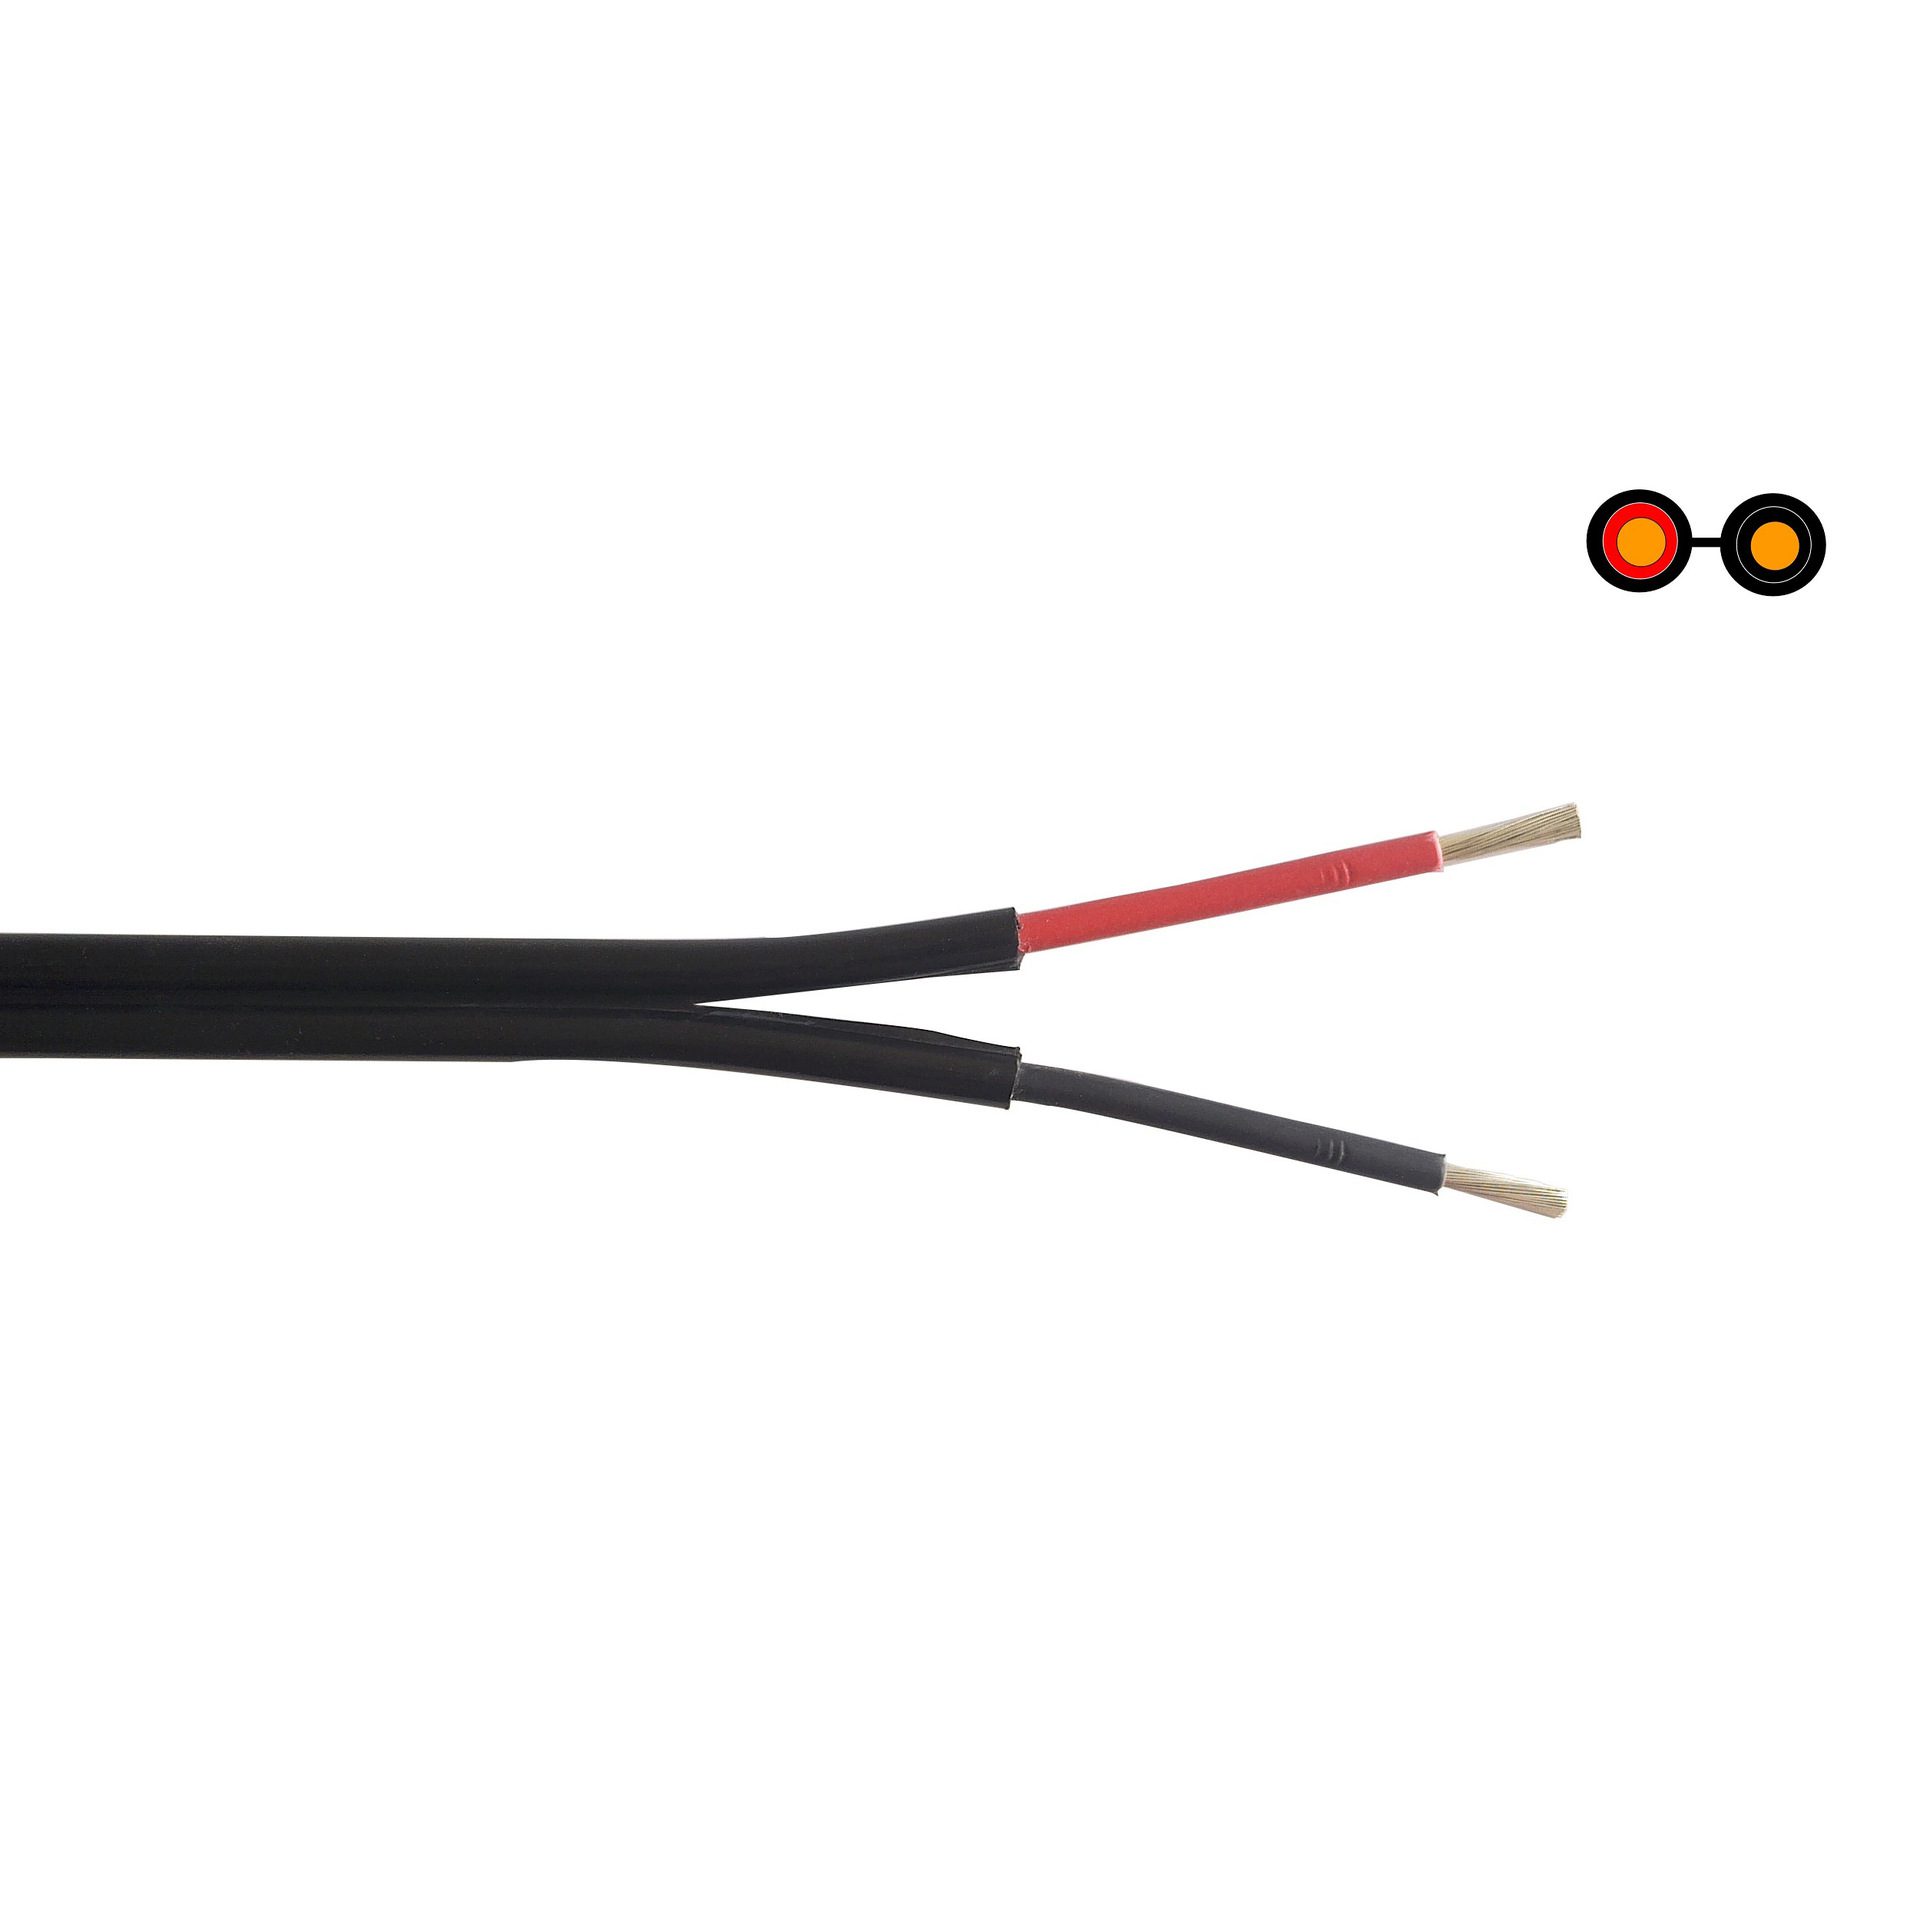 5.pv cable flat 2x4mm2